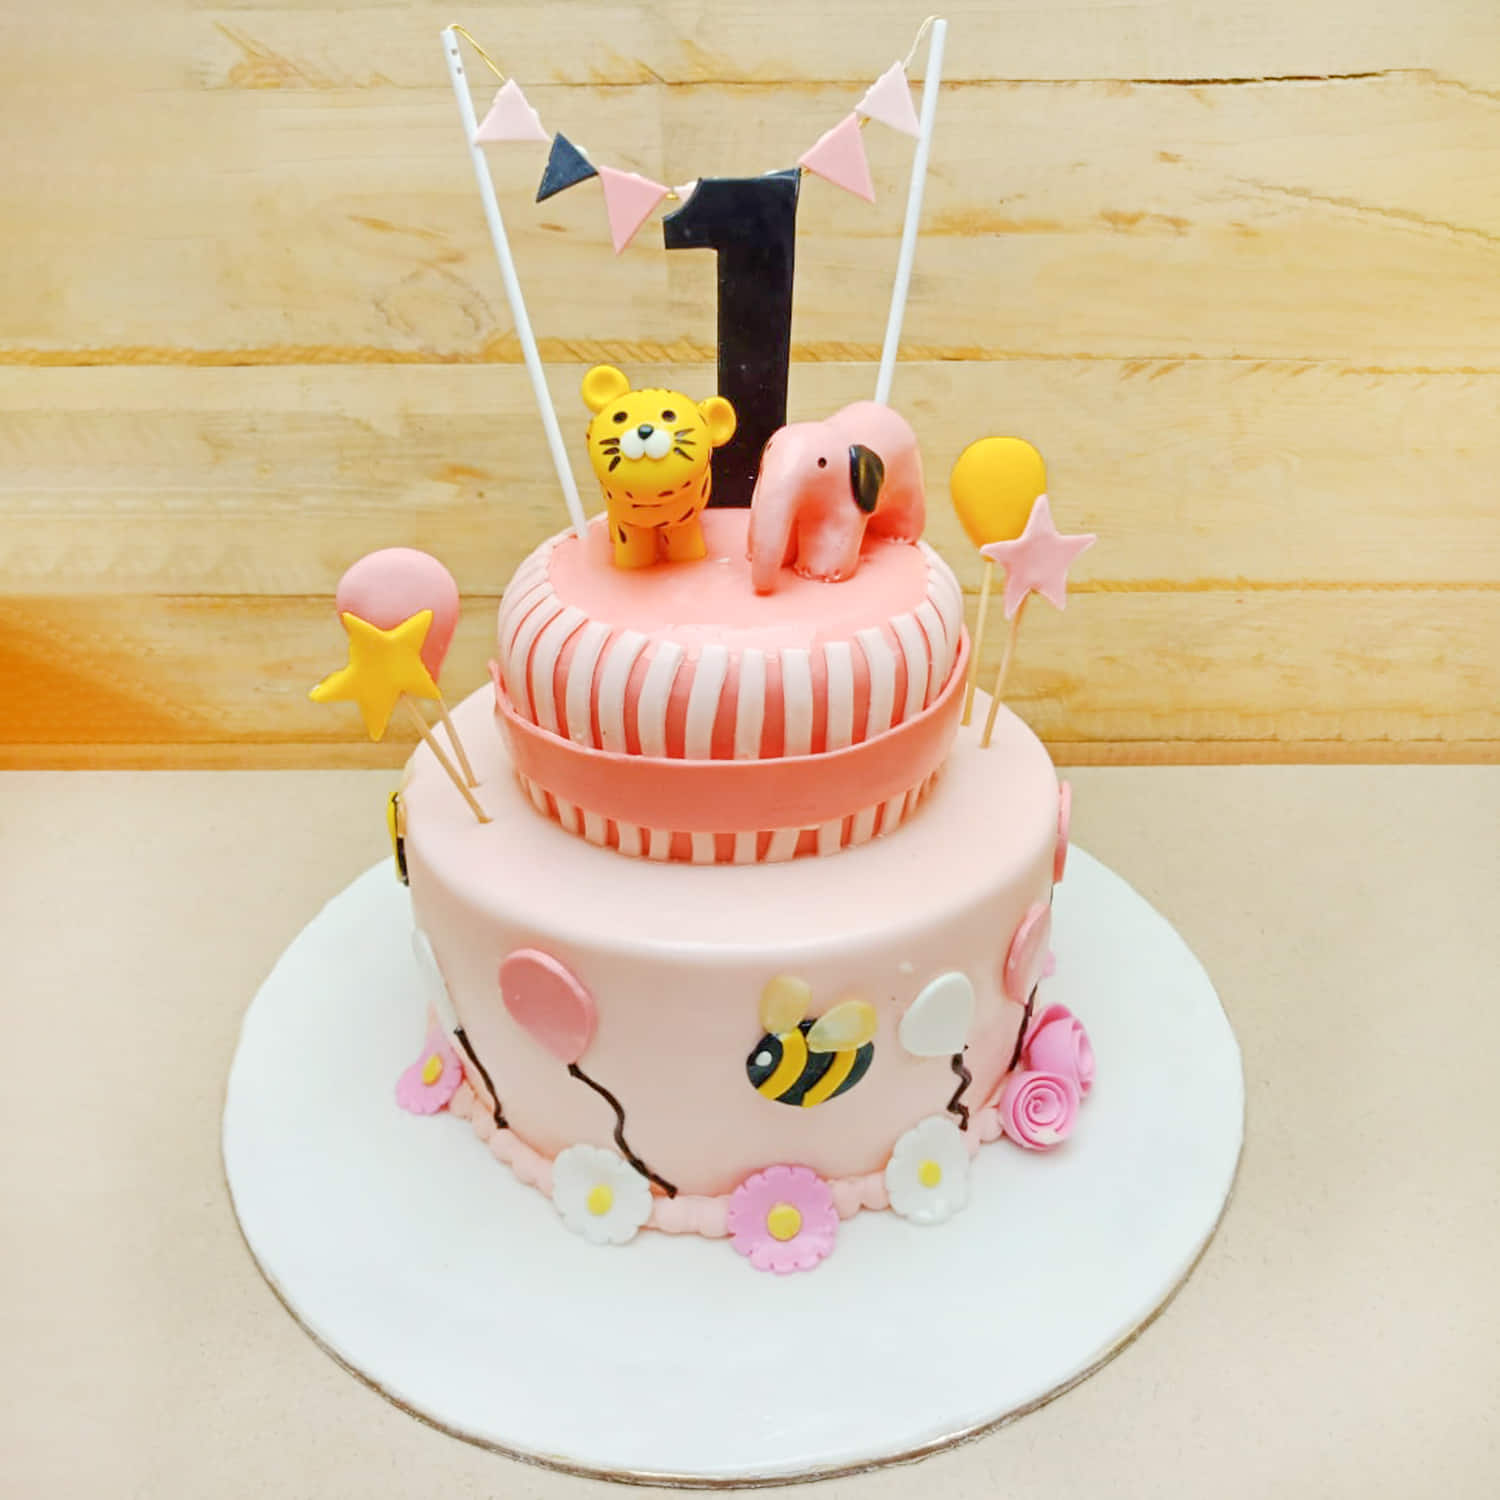 1st Birthday Cake Design Ideas for Baby Girl & Boy without fondant